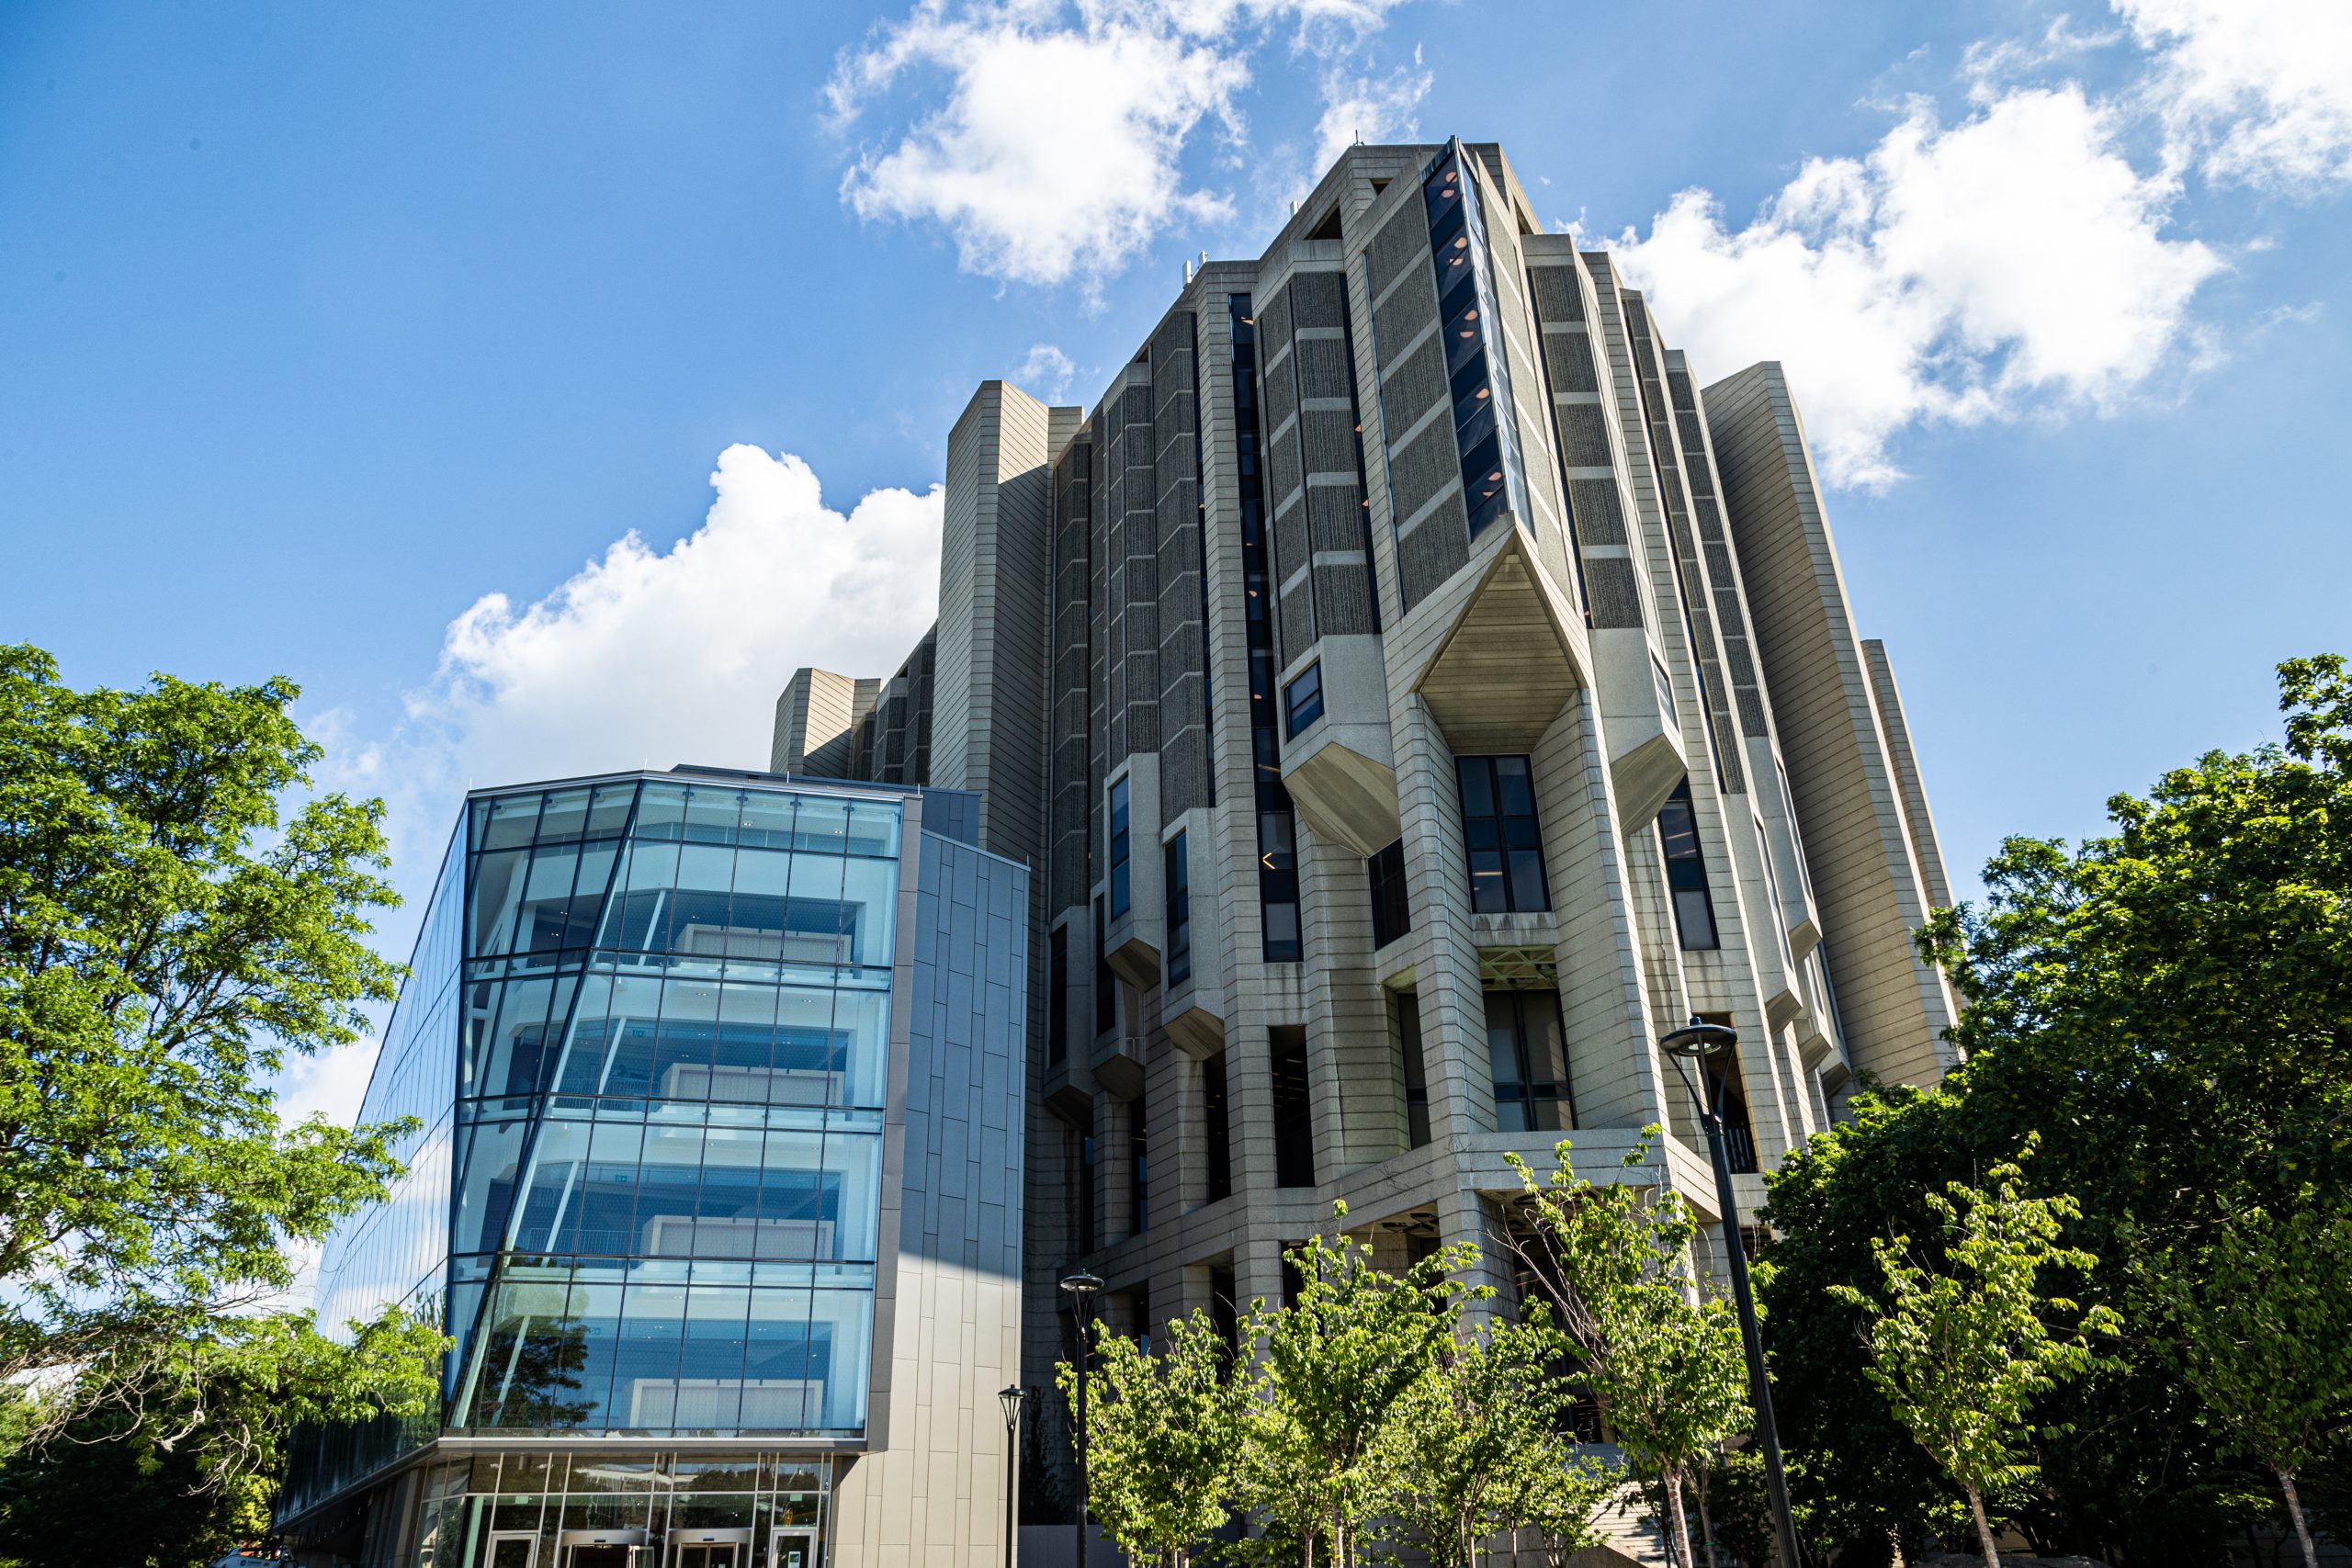 Robarts Library and Commons